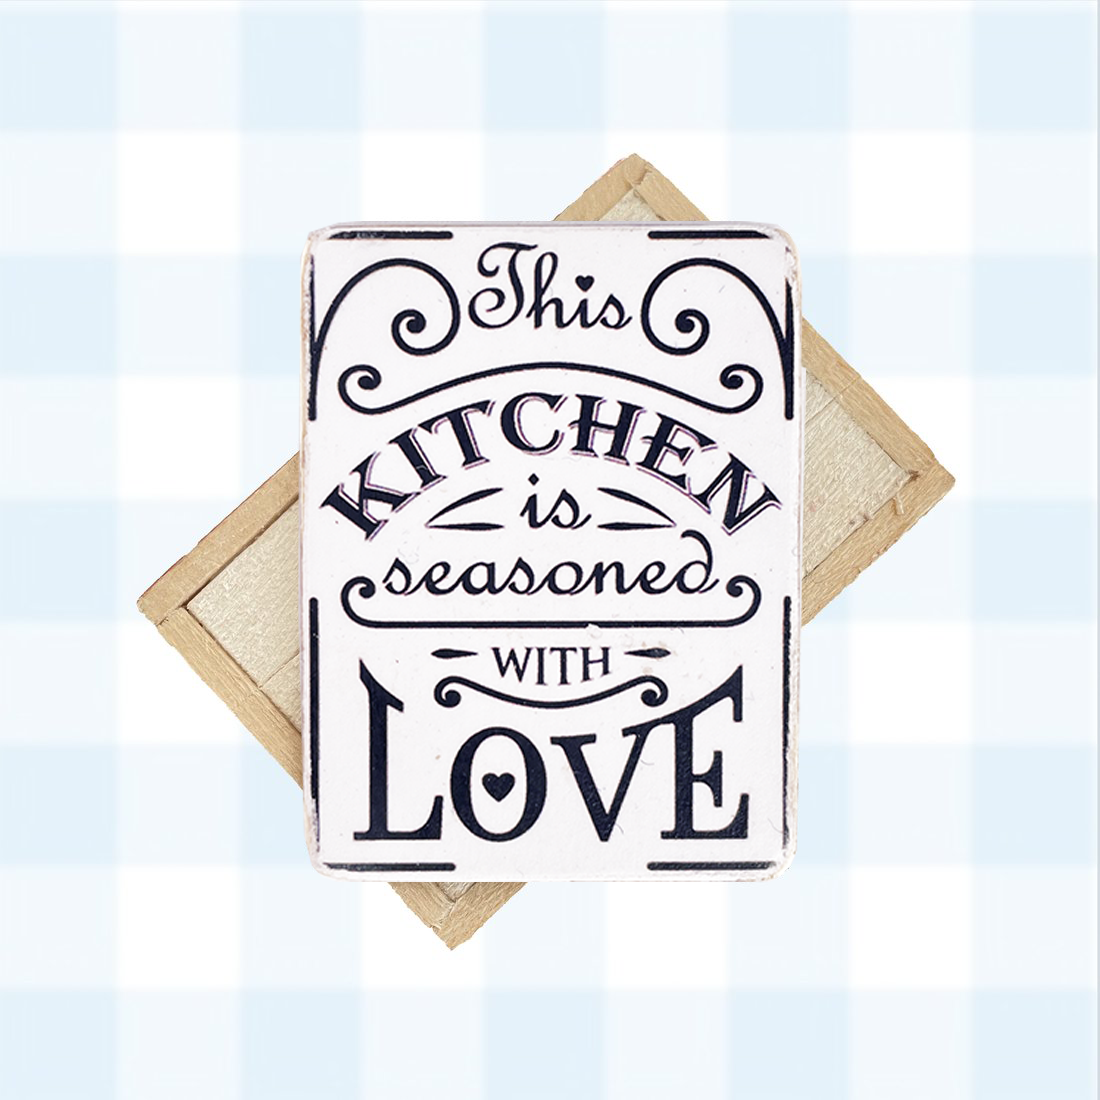 Miniature Sign - This Kitchen is Seasoned with Love